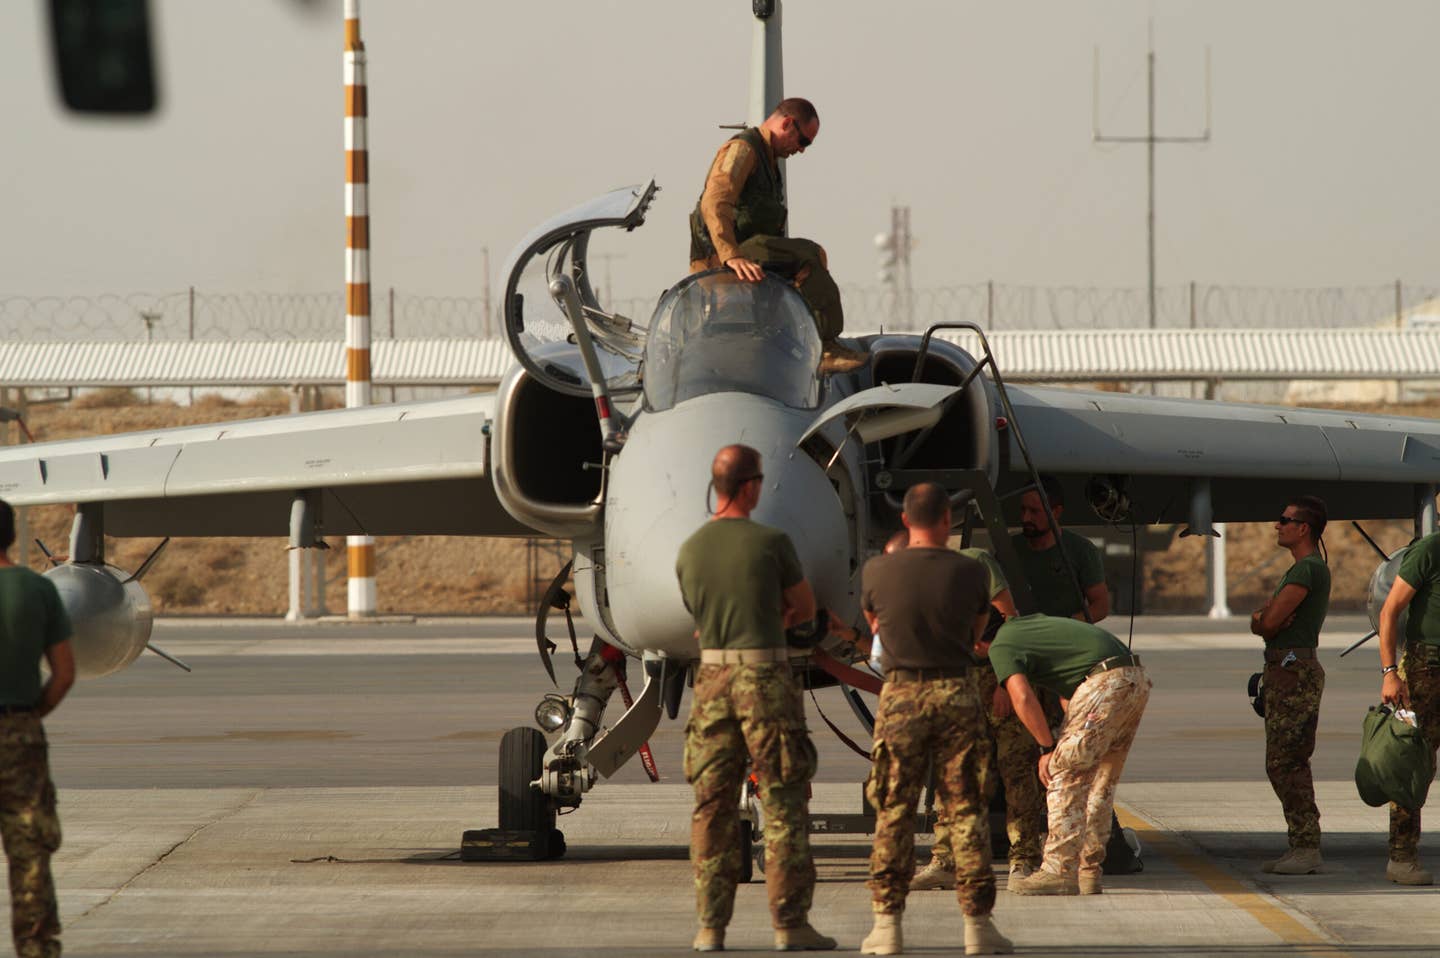 An Italian Air Force AMX ground-attack aircraft after landing at Herat, Afghanistan, in September 2010. <em>Photo by Enzo Signorelli/Getty Images</em>